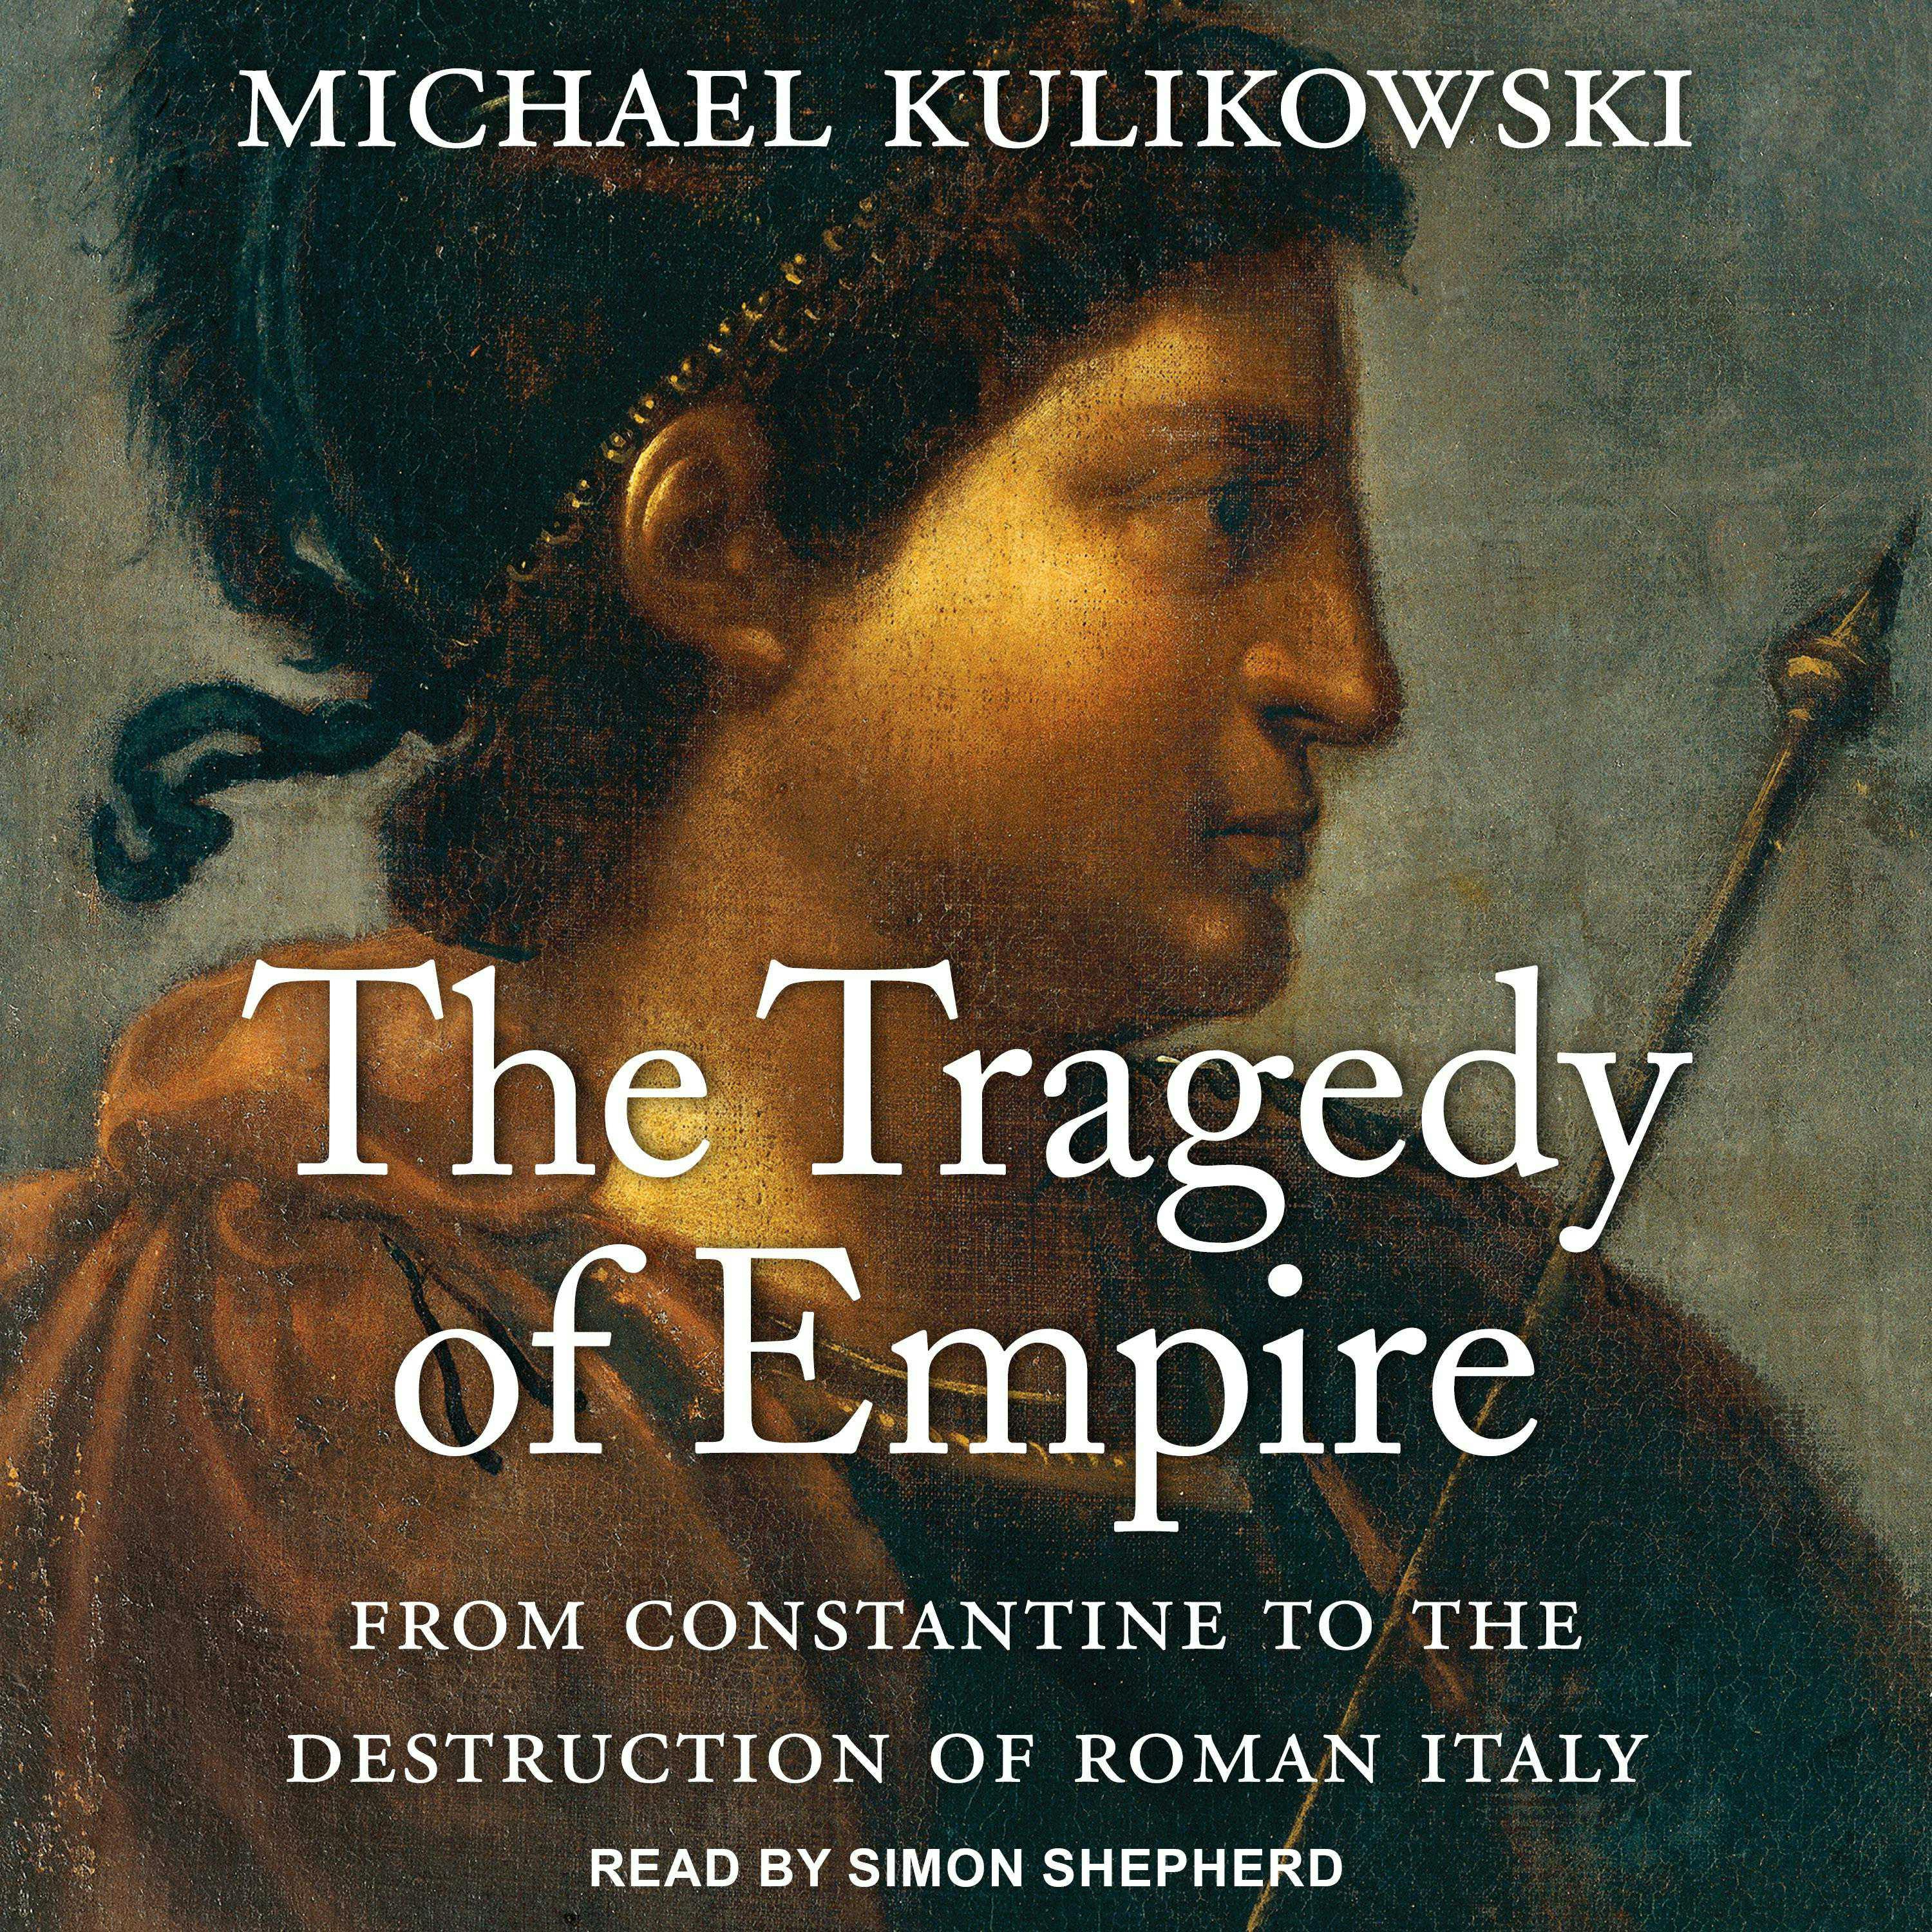 The Tragedy of Empire: From Constantine to the Destruction of Roman Italy - Michael Kulikowski